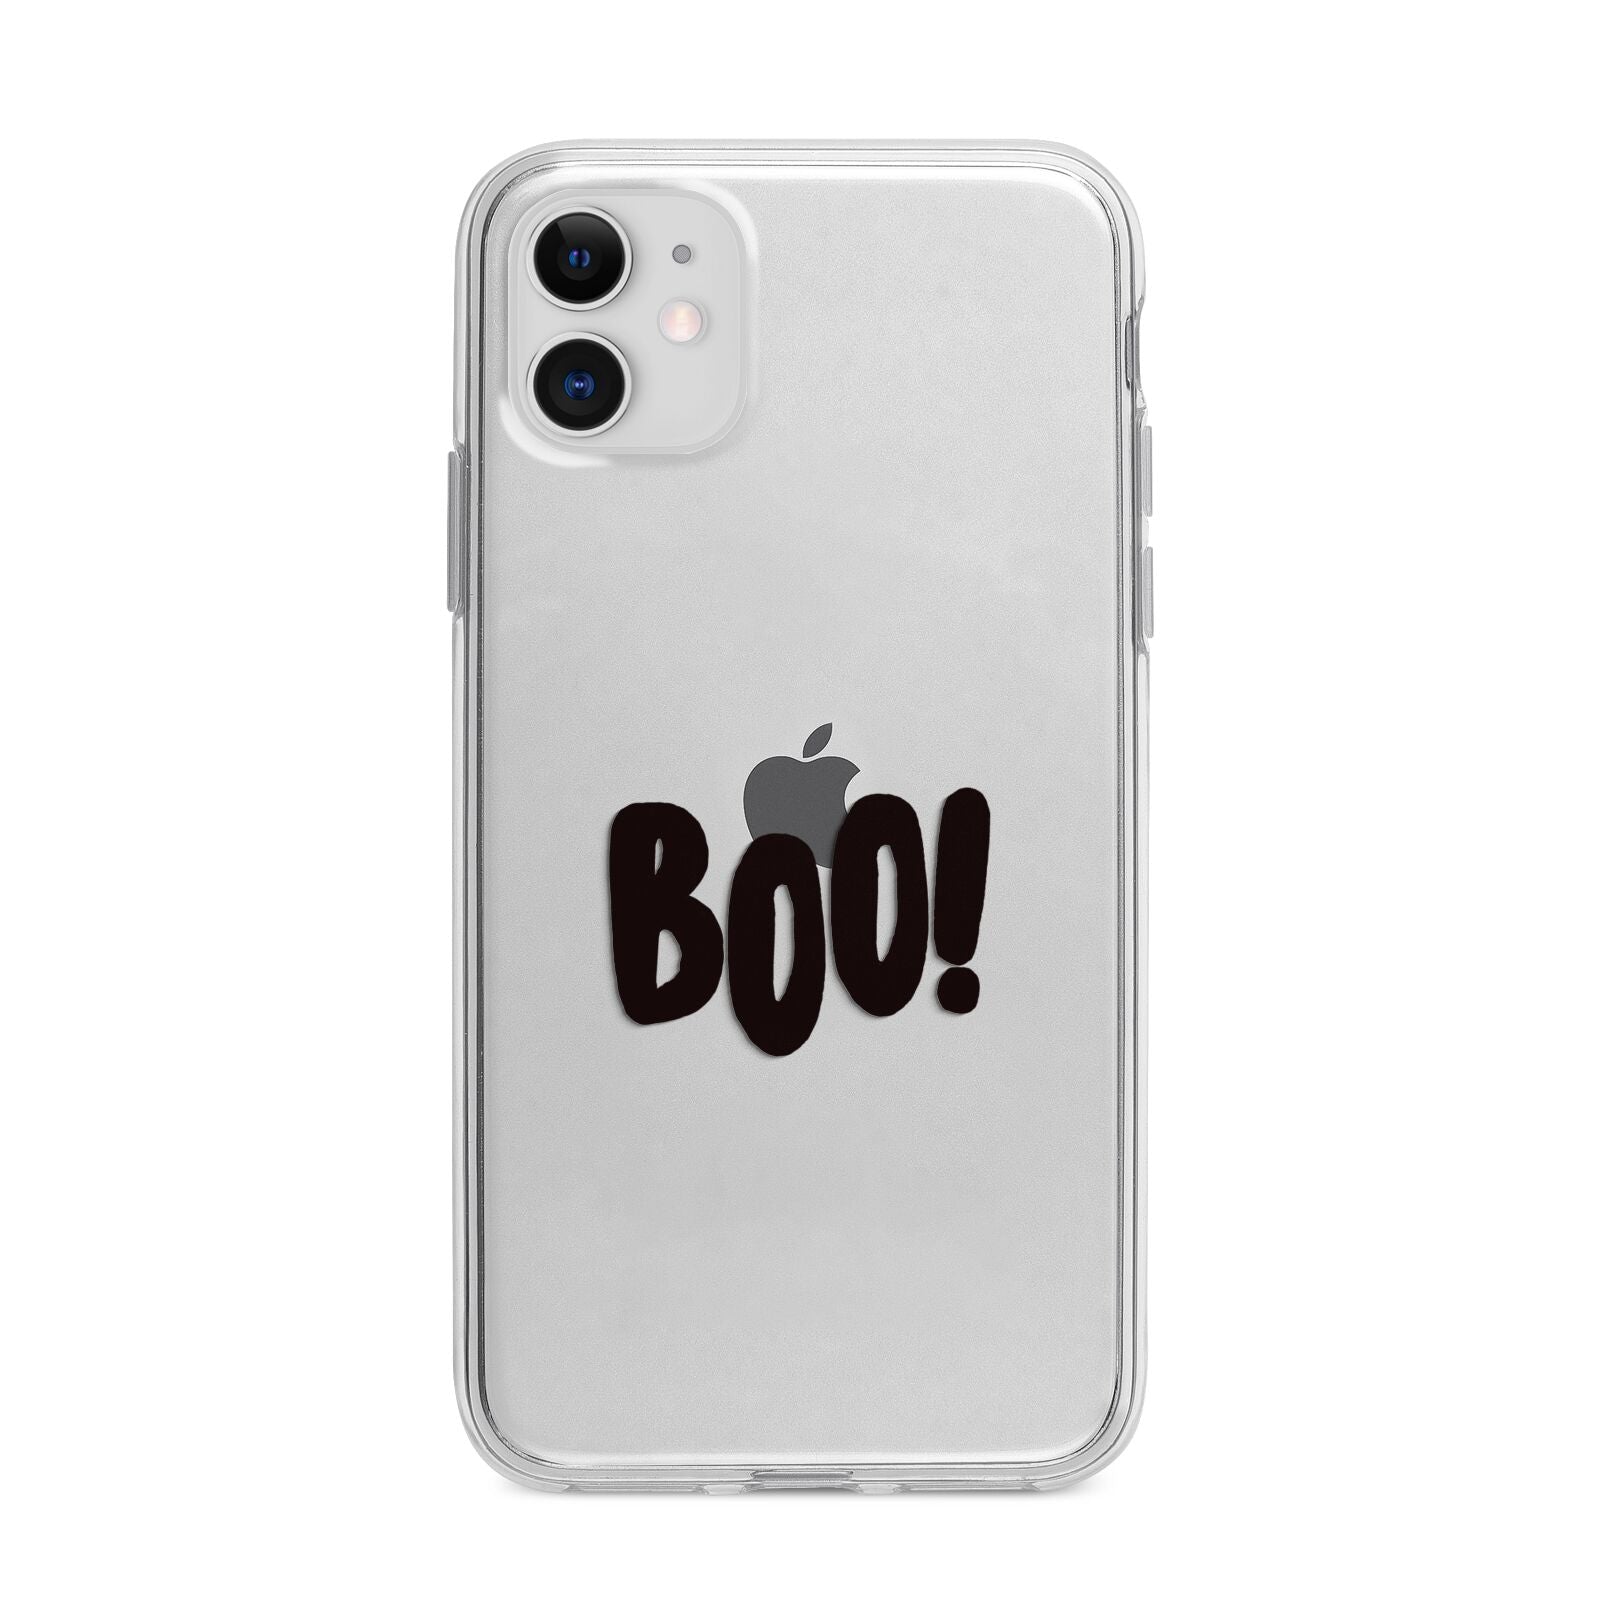 Boo Black Apple iPhone 11 in White with Bumper Case